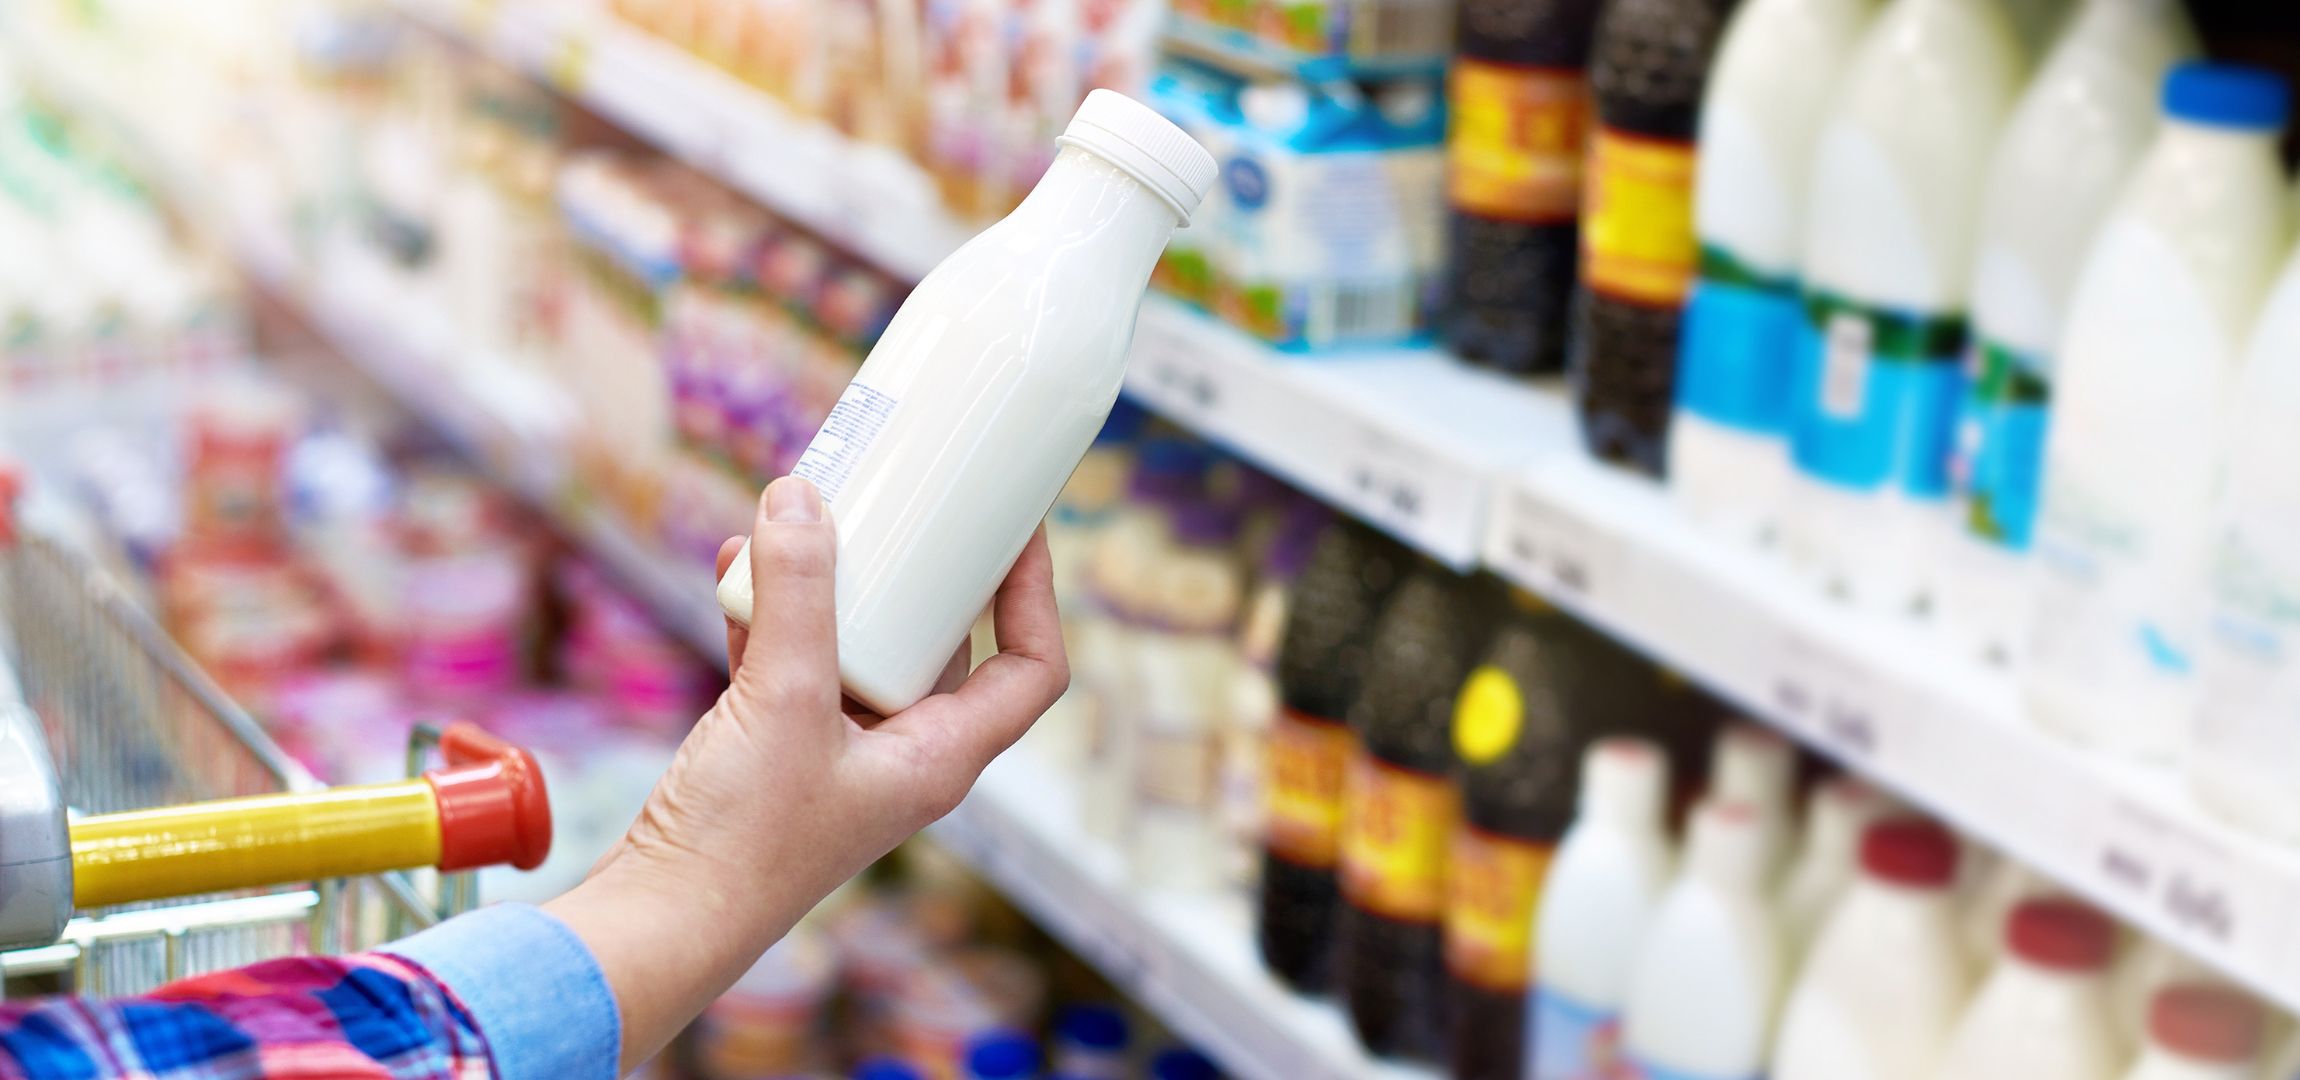 A-hand-holding-a-product-with-a-label-in-a-grocery-aisle Label Printing: The Role in Product Safety & Warning Information